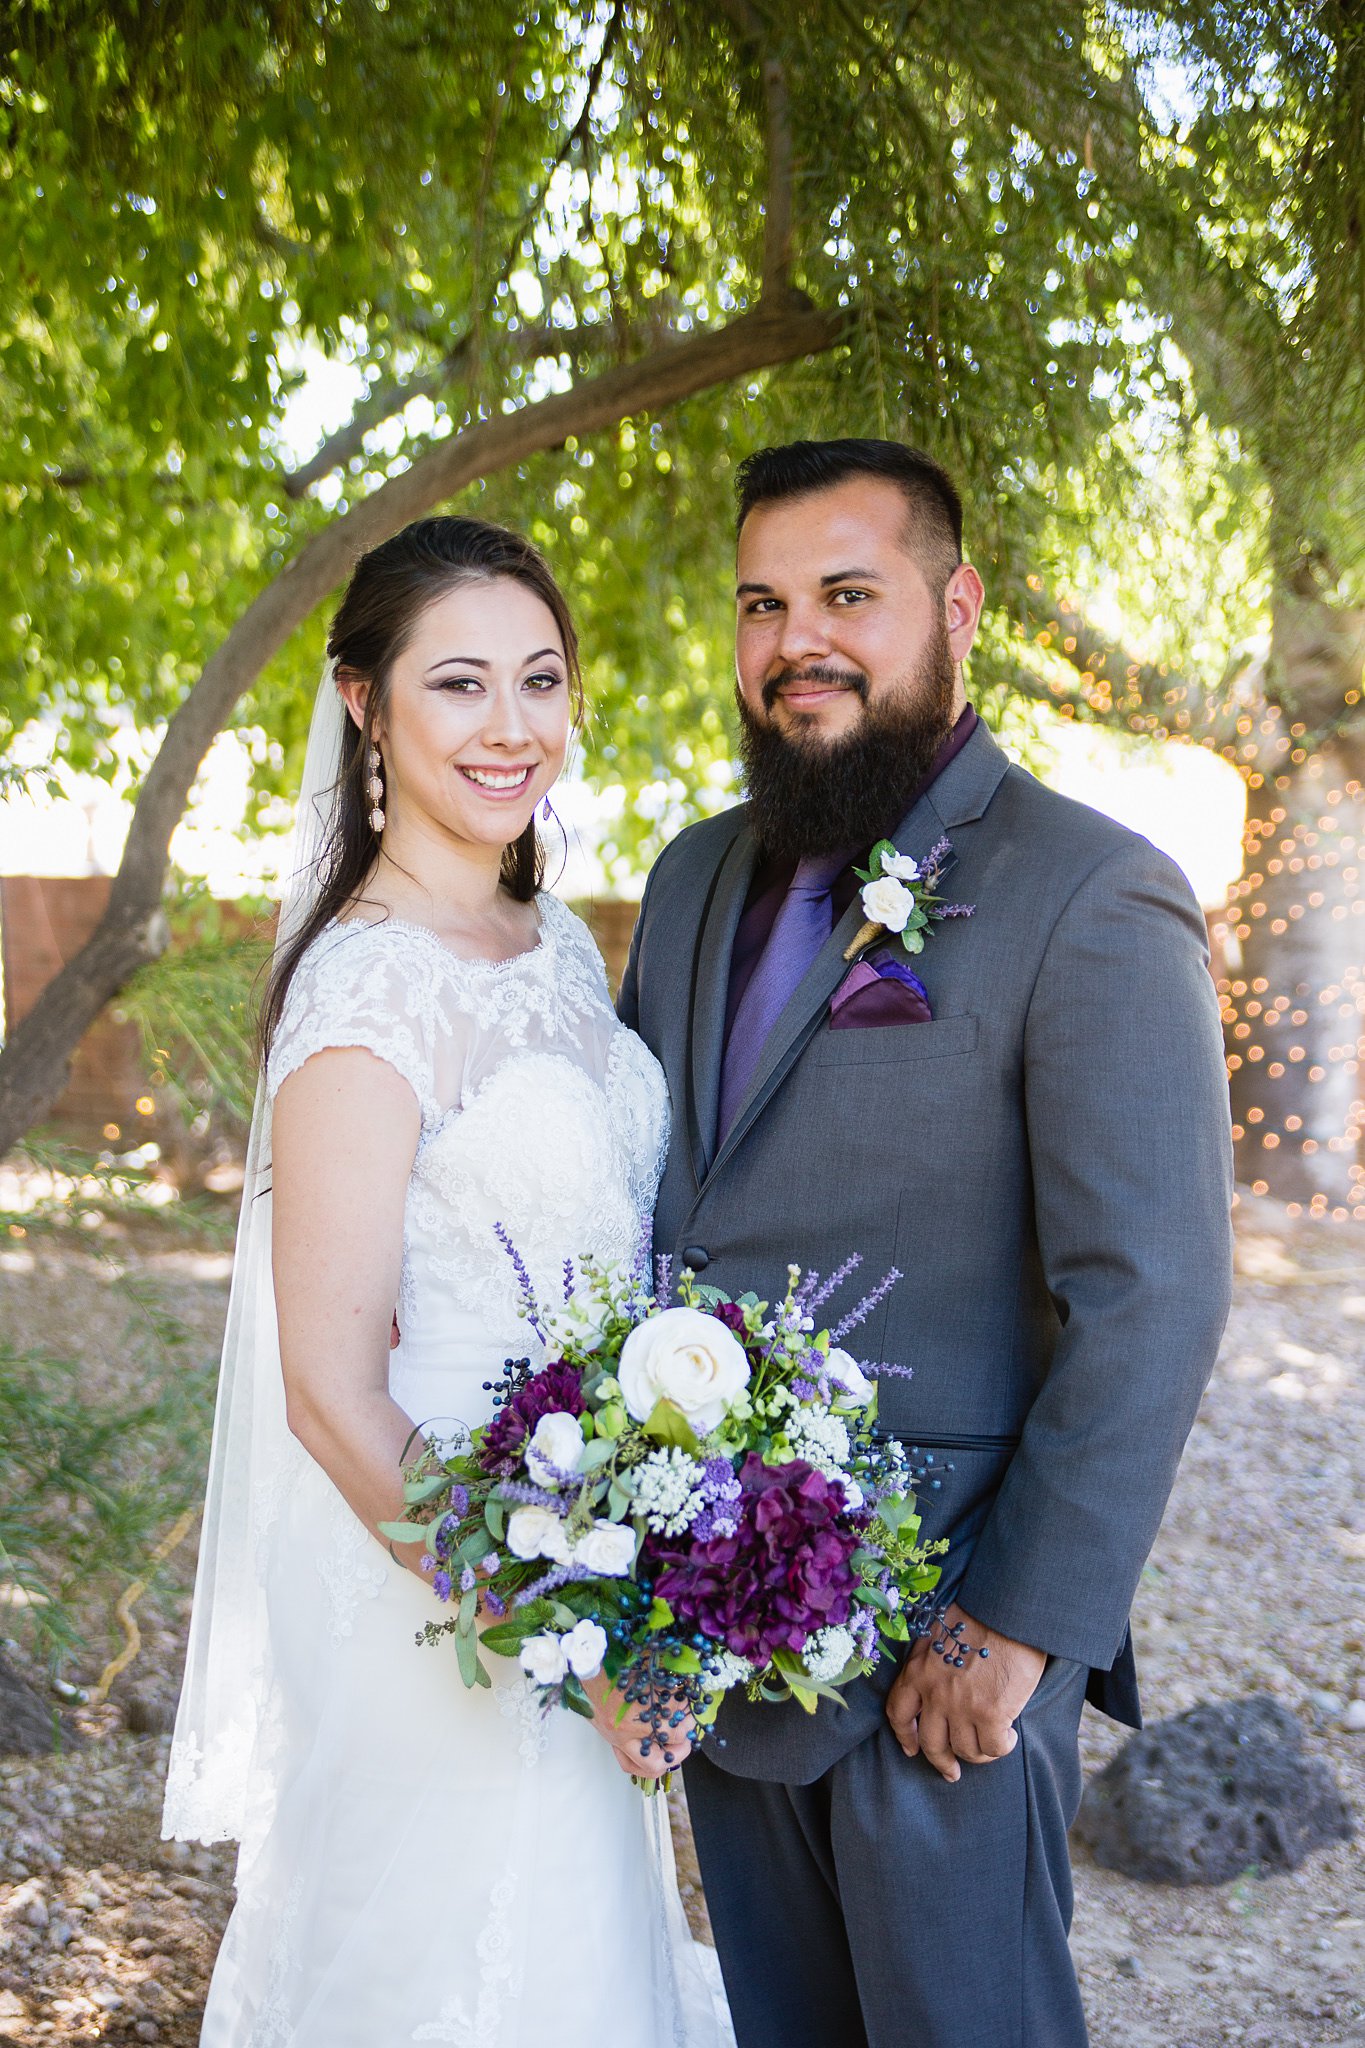 Bride and groom from their purple and grey rustic wedding at Schnepf Farm's Farmhouse by Phoenix wedding photographers PMA Photography.